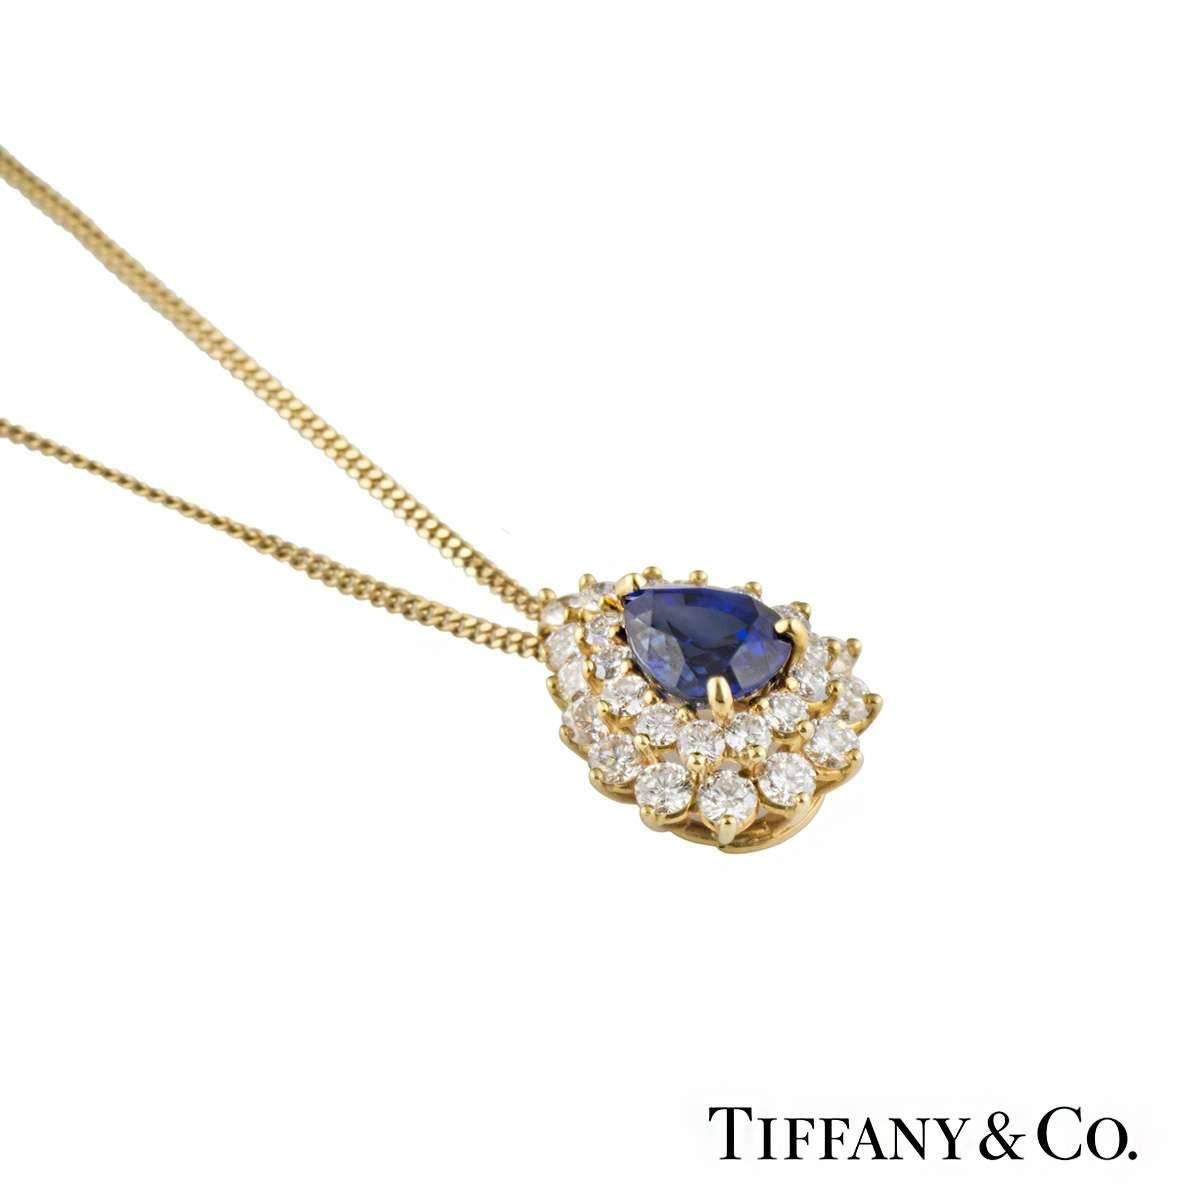 A timeless 18k yellow gold Tiffany & Co. sapphire and diamond pendant. The pendant comprises of a pear cut sapphire with an approximate total weight of 1.00ct, with a deep blue hue throughout. Complimenting this are 29 round brilliant cut